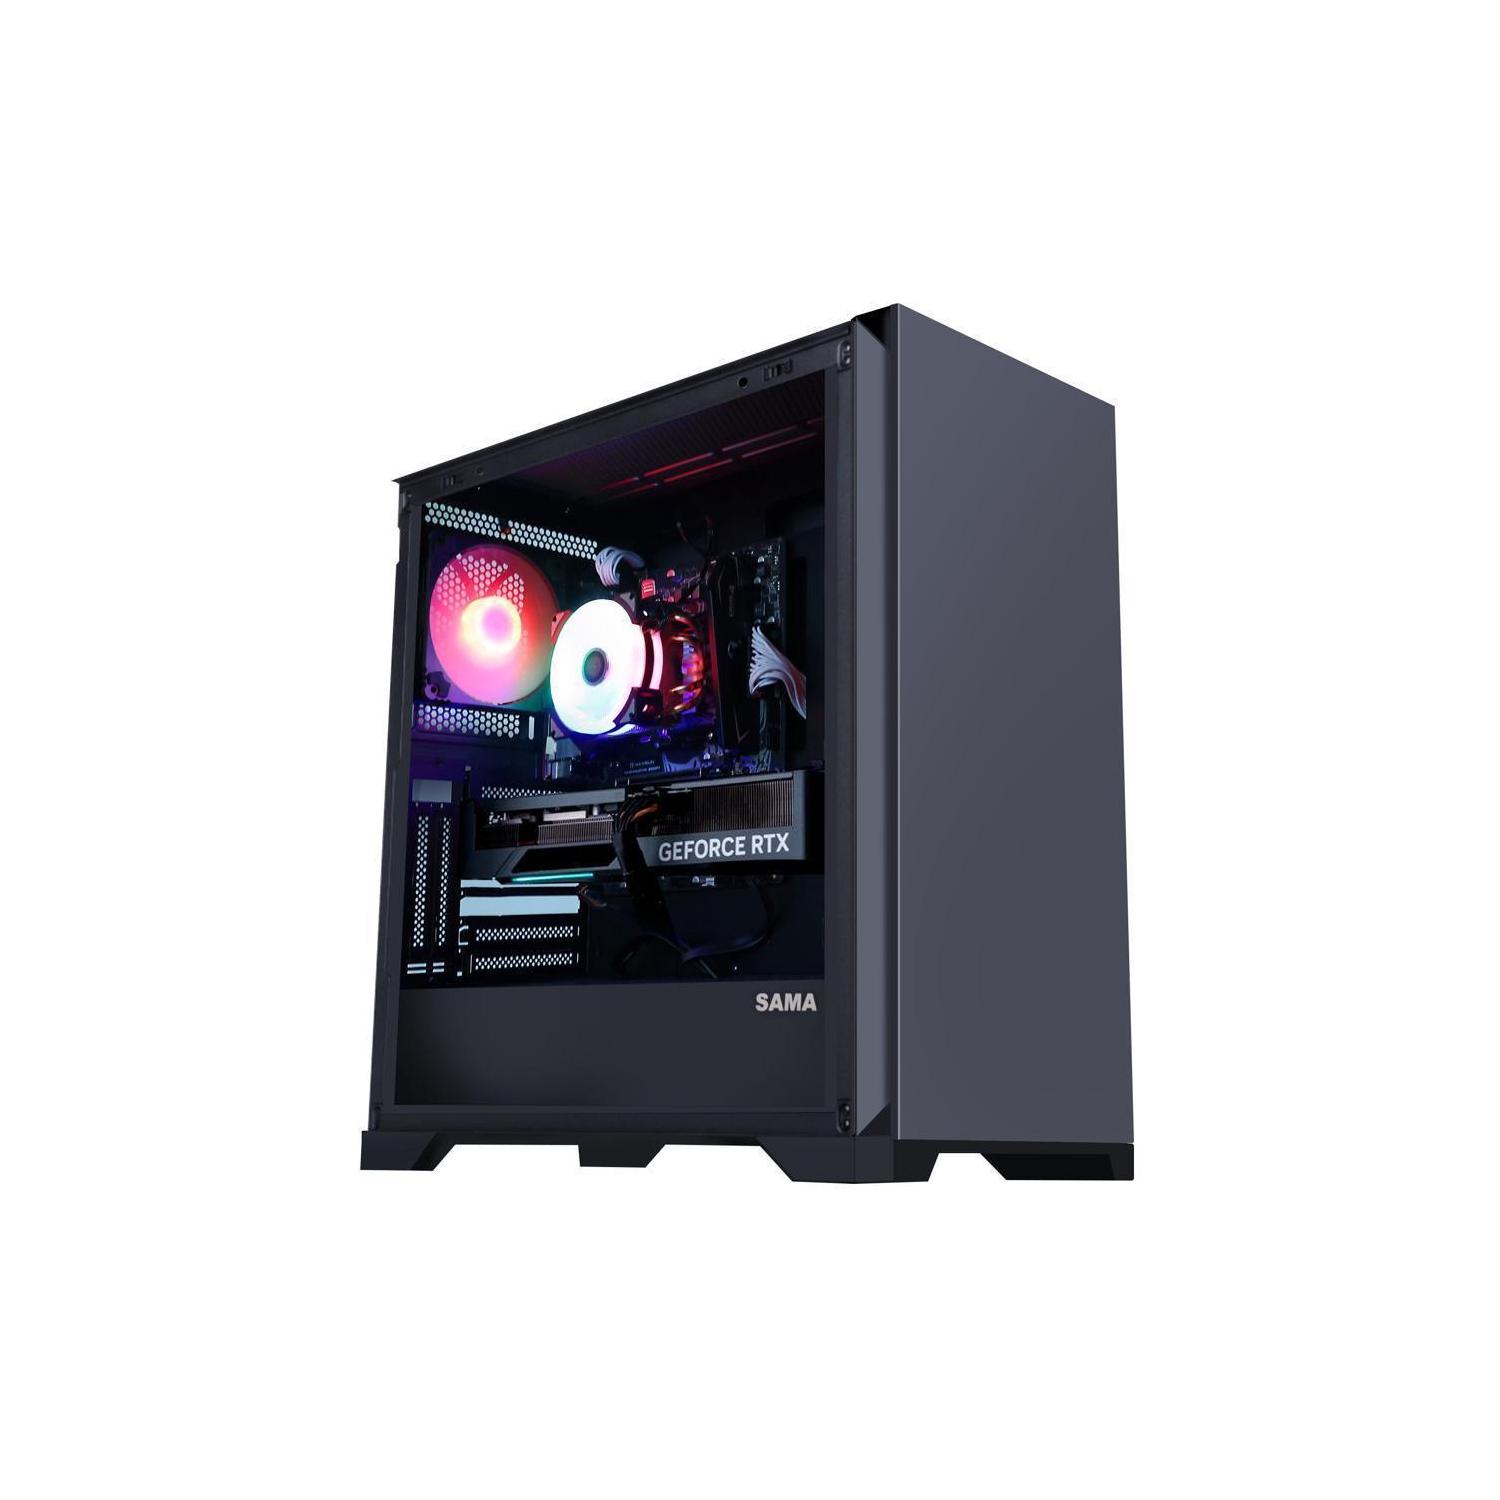 Hoengager Ares Gaming - Intel Core i5-12600K 10-Core 3.7GHz- RX 6750 XT 12G - 32GB DDR4 3200MHz - 500GB M.2 + 2TB 2.5'' SATA SSD- WIFI -RGB Fans - Windows 11 Pro Computer